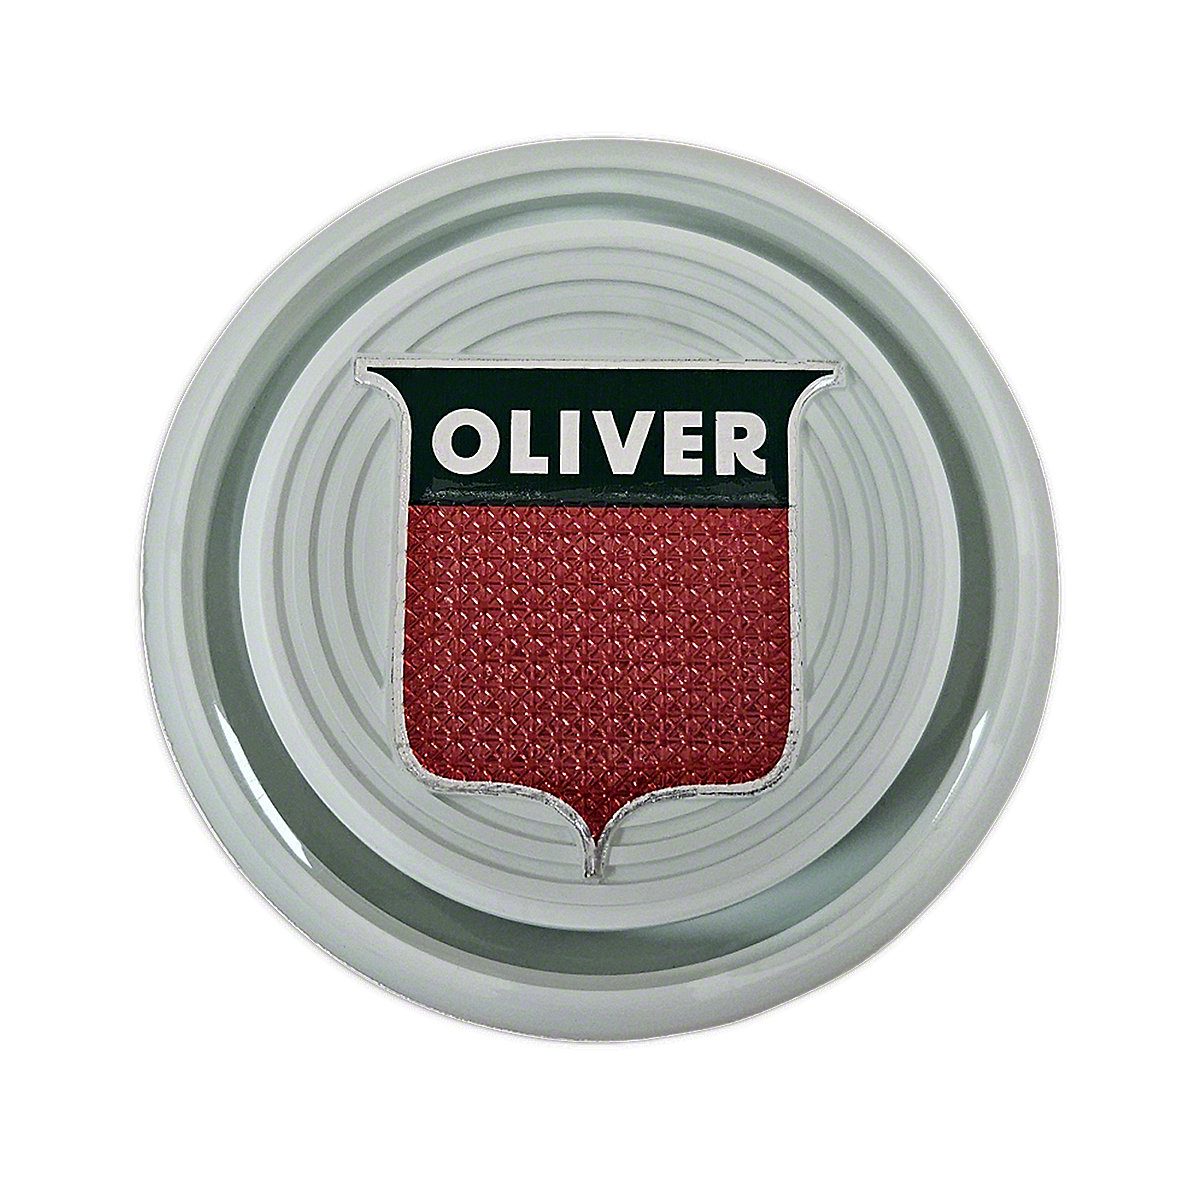 Steering Wheel Cap - Oliver Plastic Cap With White Face. - Oliver 550, 660, 770, 880, 950, 990, 995, 1550, 1600, 1650, 1750, 1800, 1850, 1900, 1950, 2050, 2150.